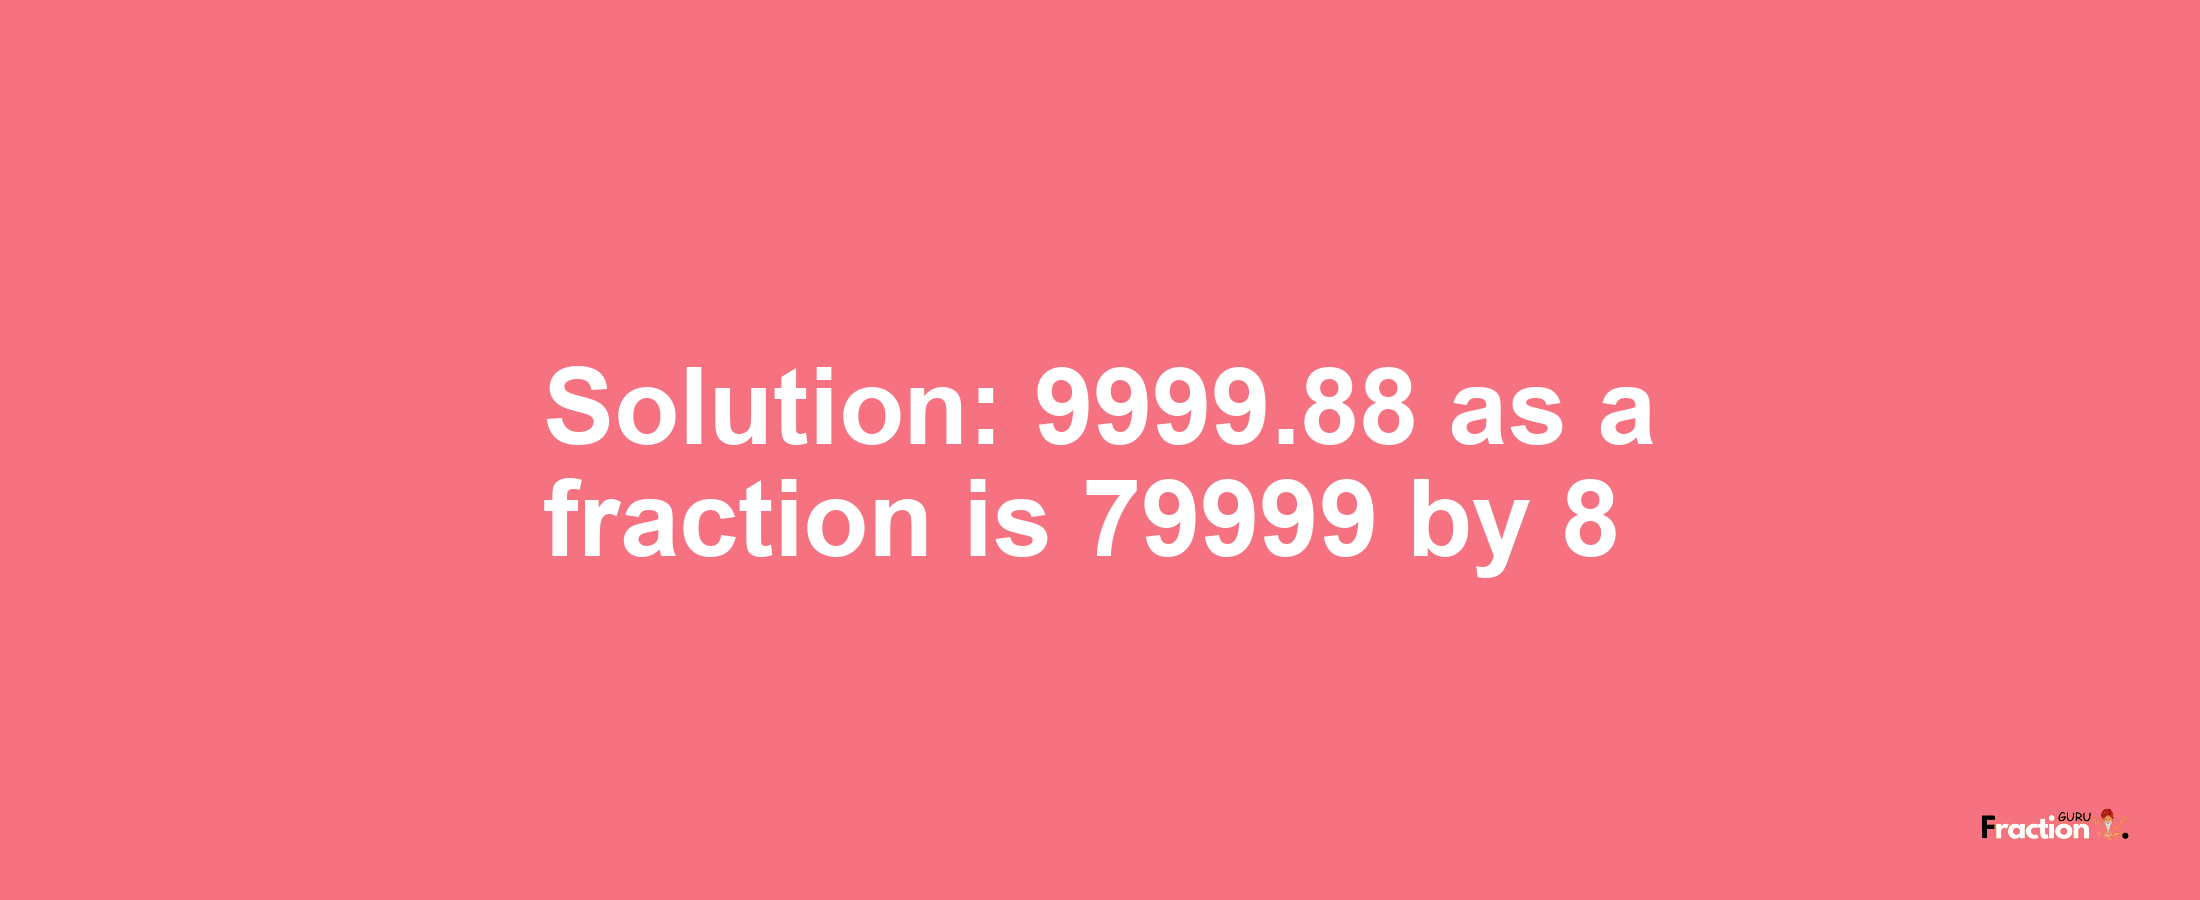 Solution:9999.88 as a fraction is 79999/8